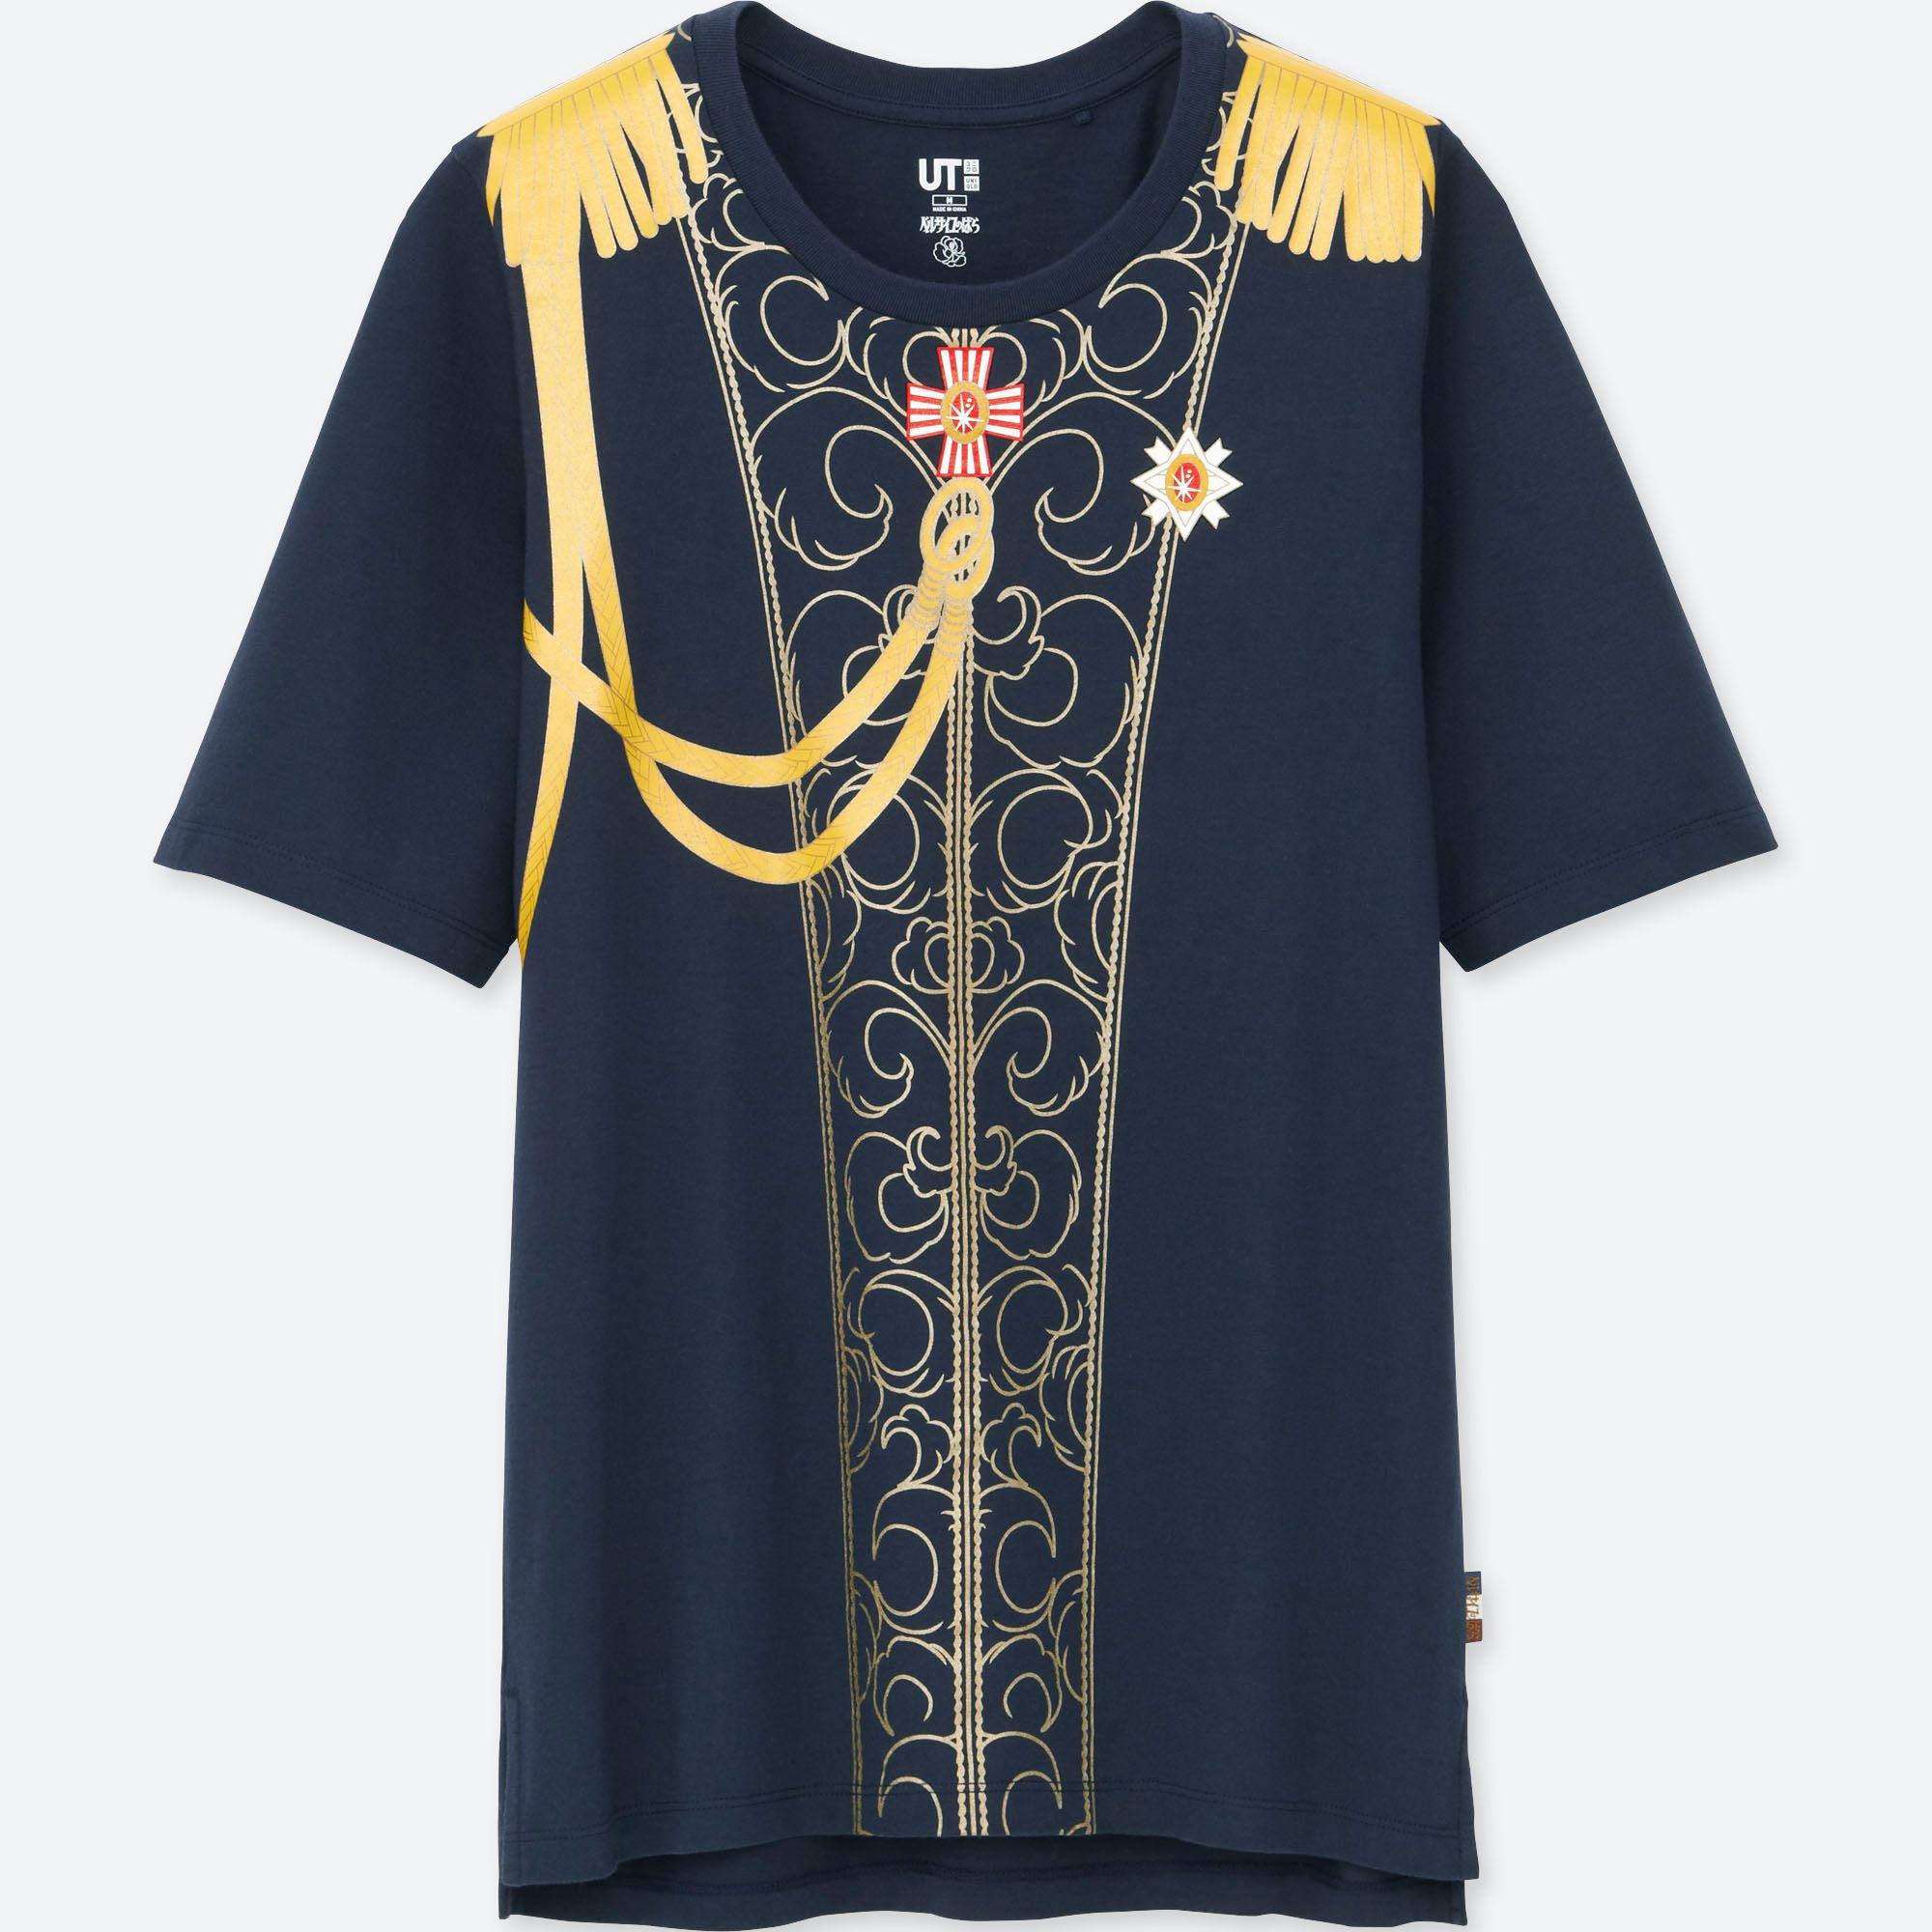 Uniqlo's New Rose of Versailles Line Will Make Any Manga Fan Swoon